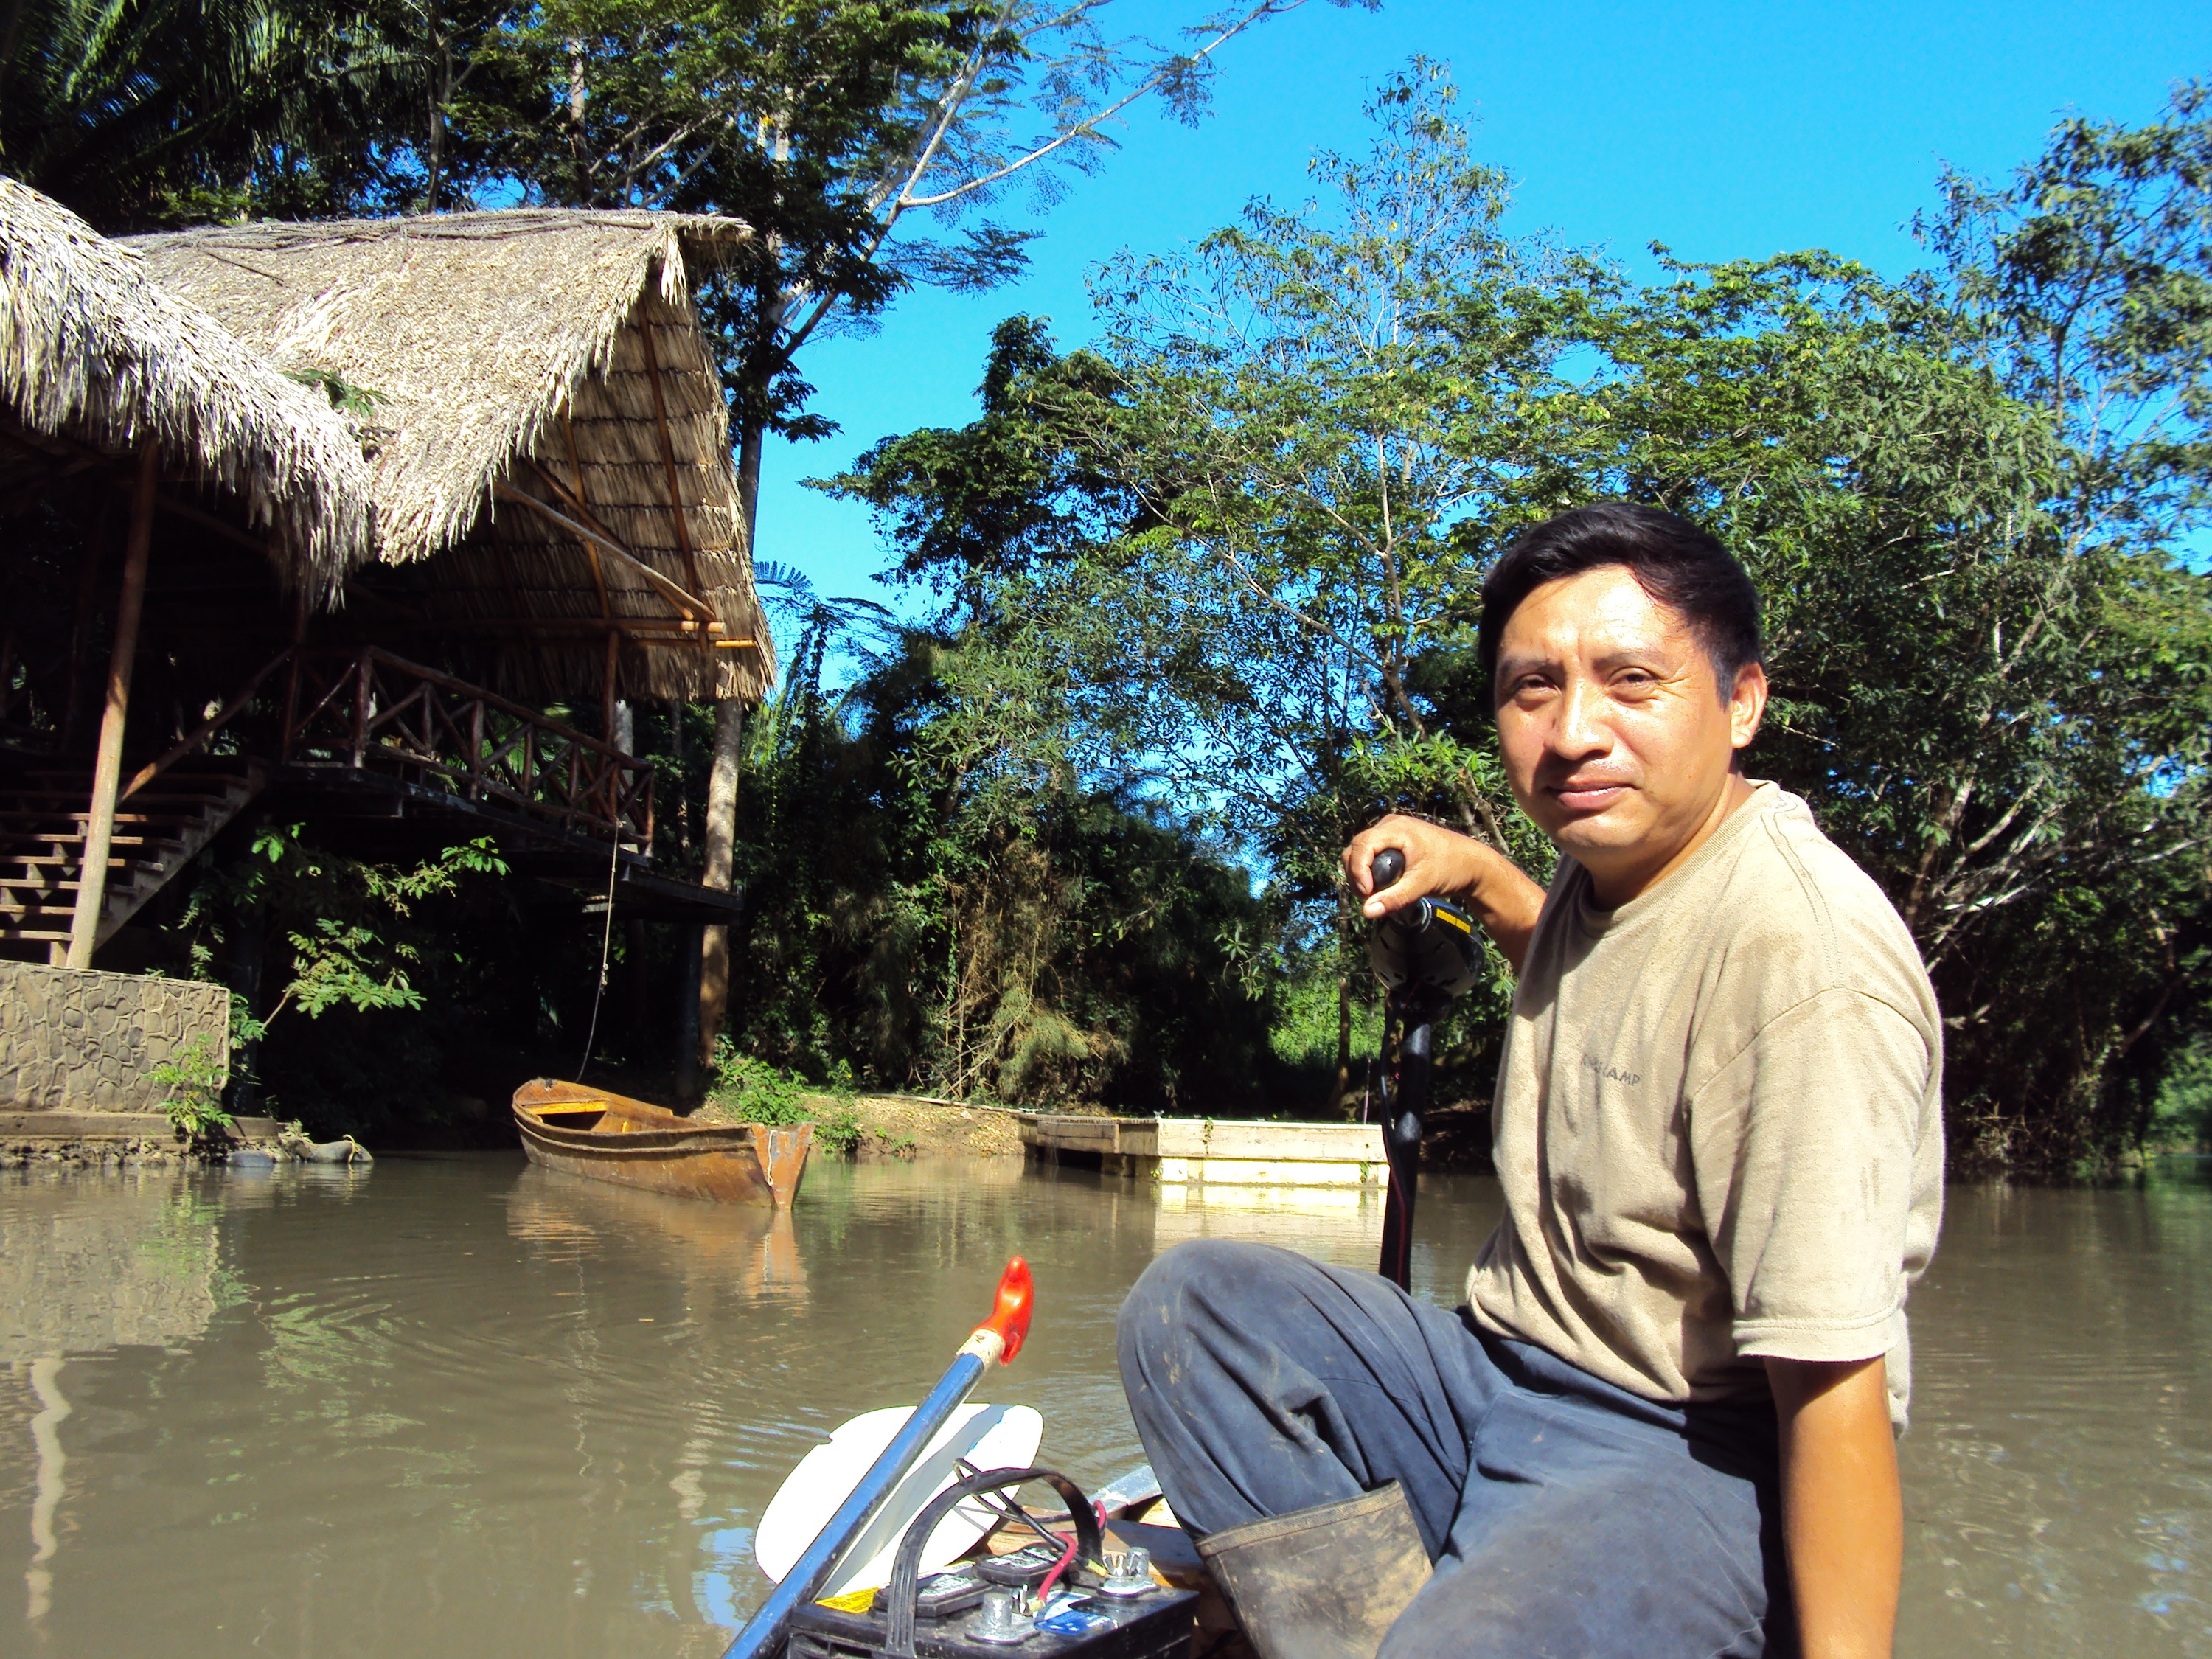 Man in a boat smiles surrounded by water and a thatched hut